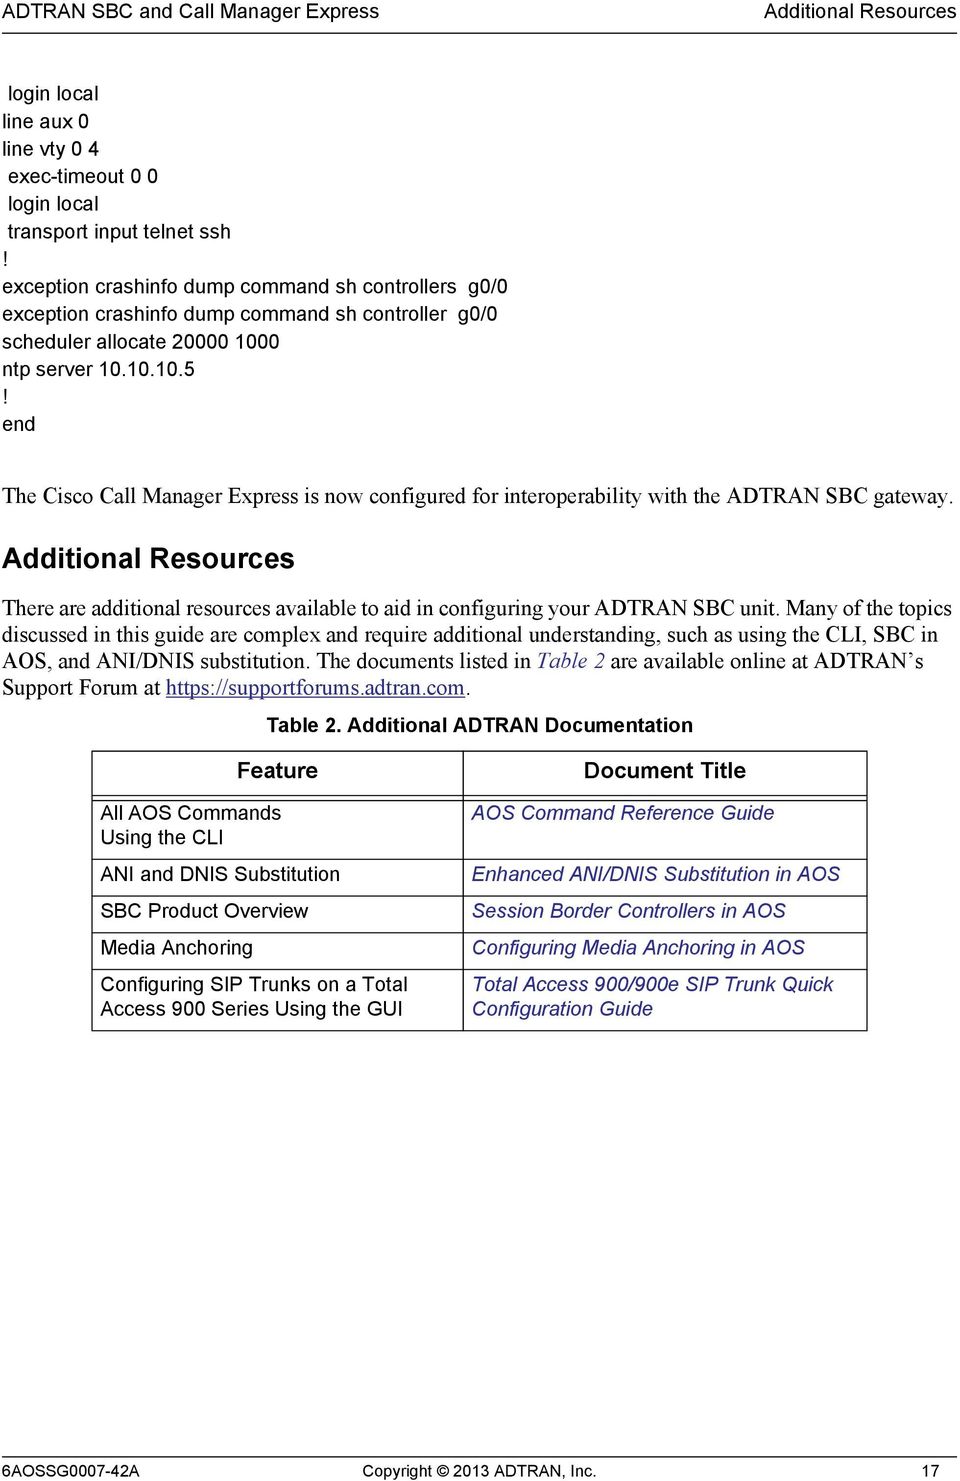 Additional Resources There are additional resources available to aid in configuring your ADTRAN SBC unit.